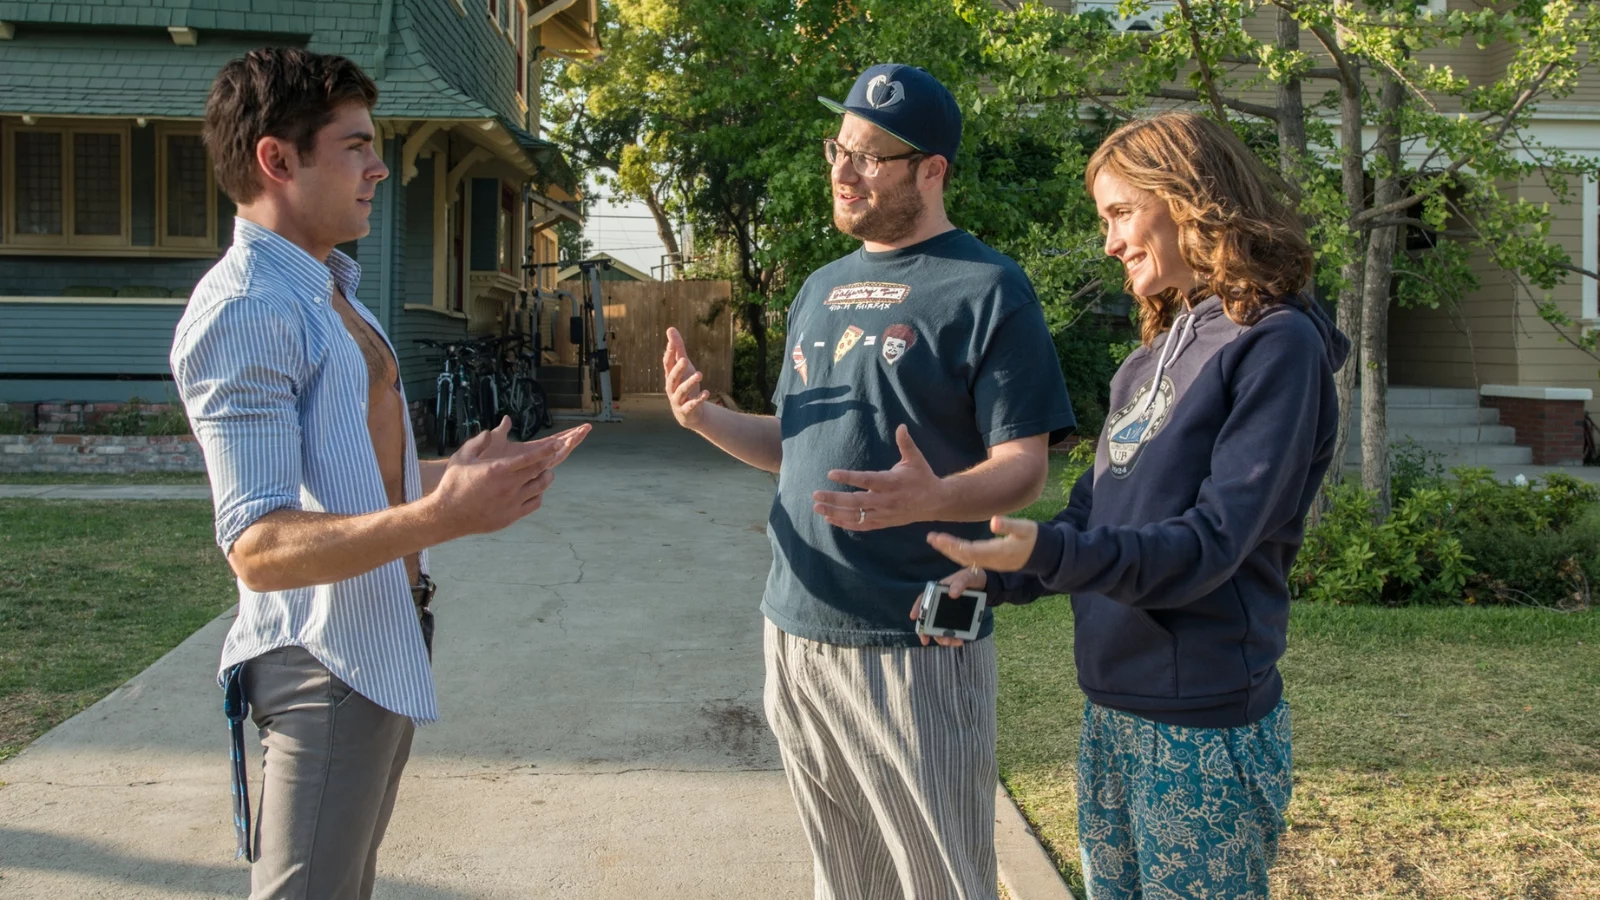 A scene from the movie "Neighbors."